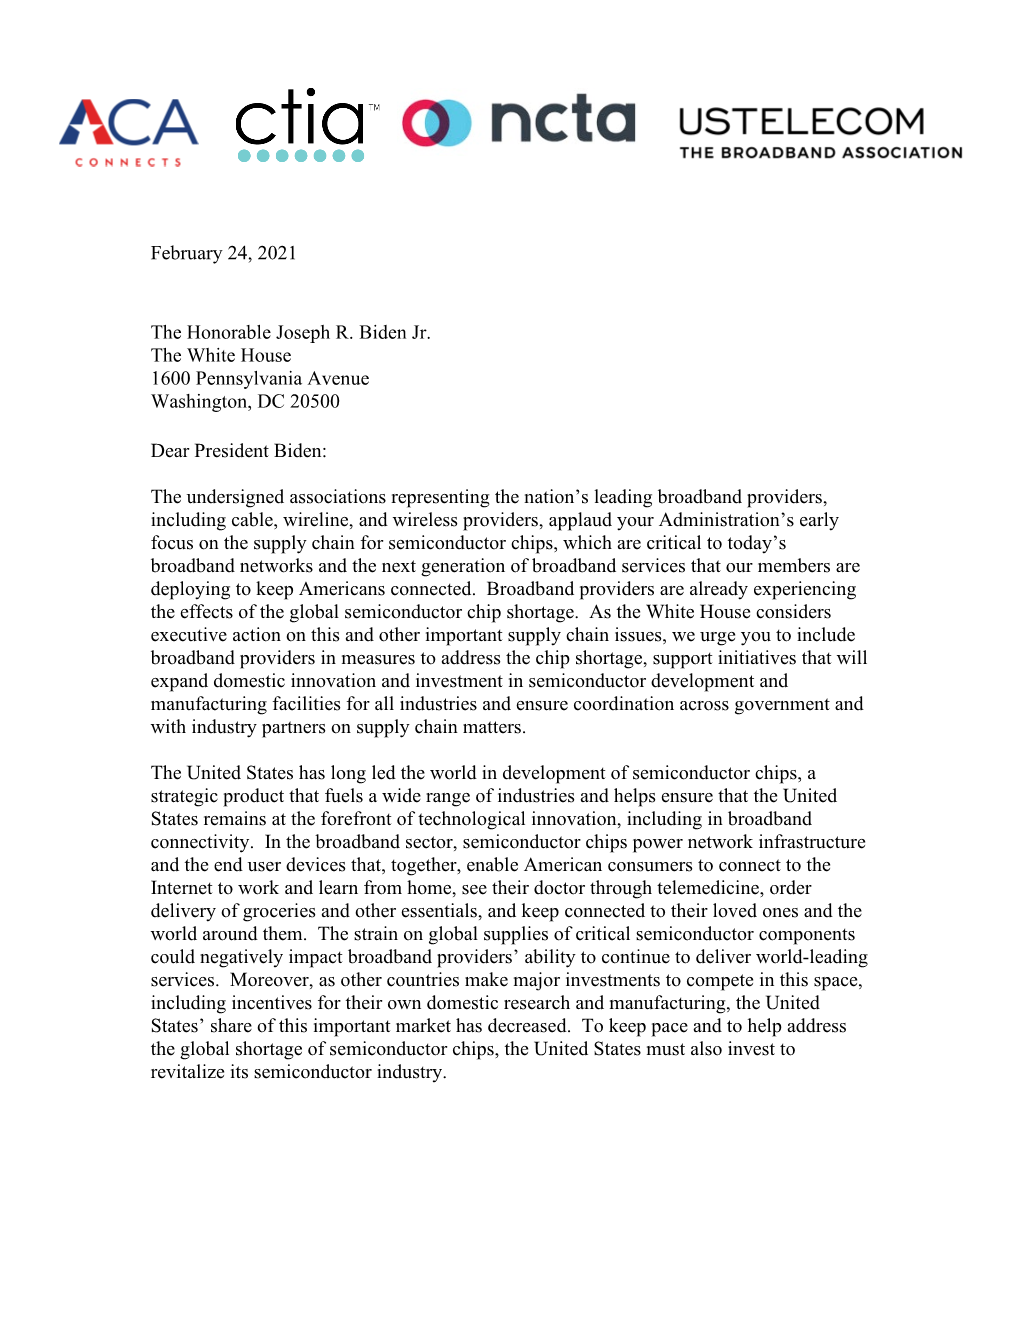 Download Association Letter to the White House On